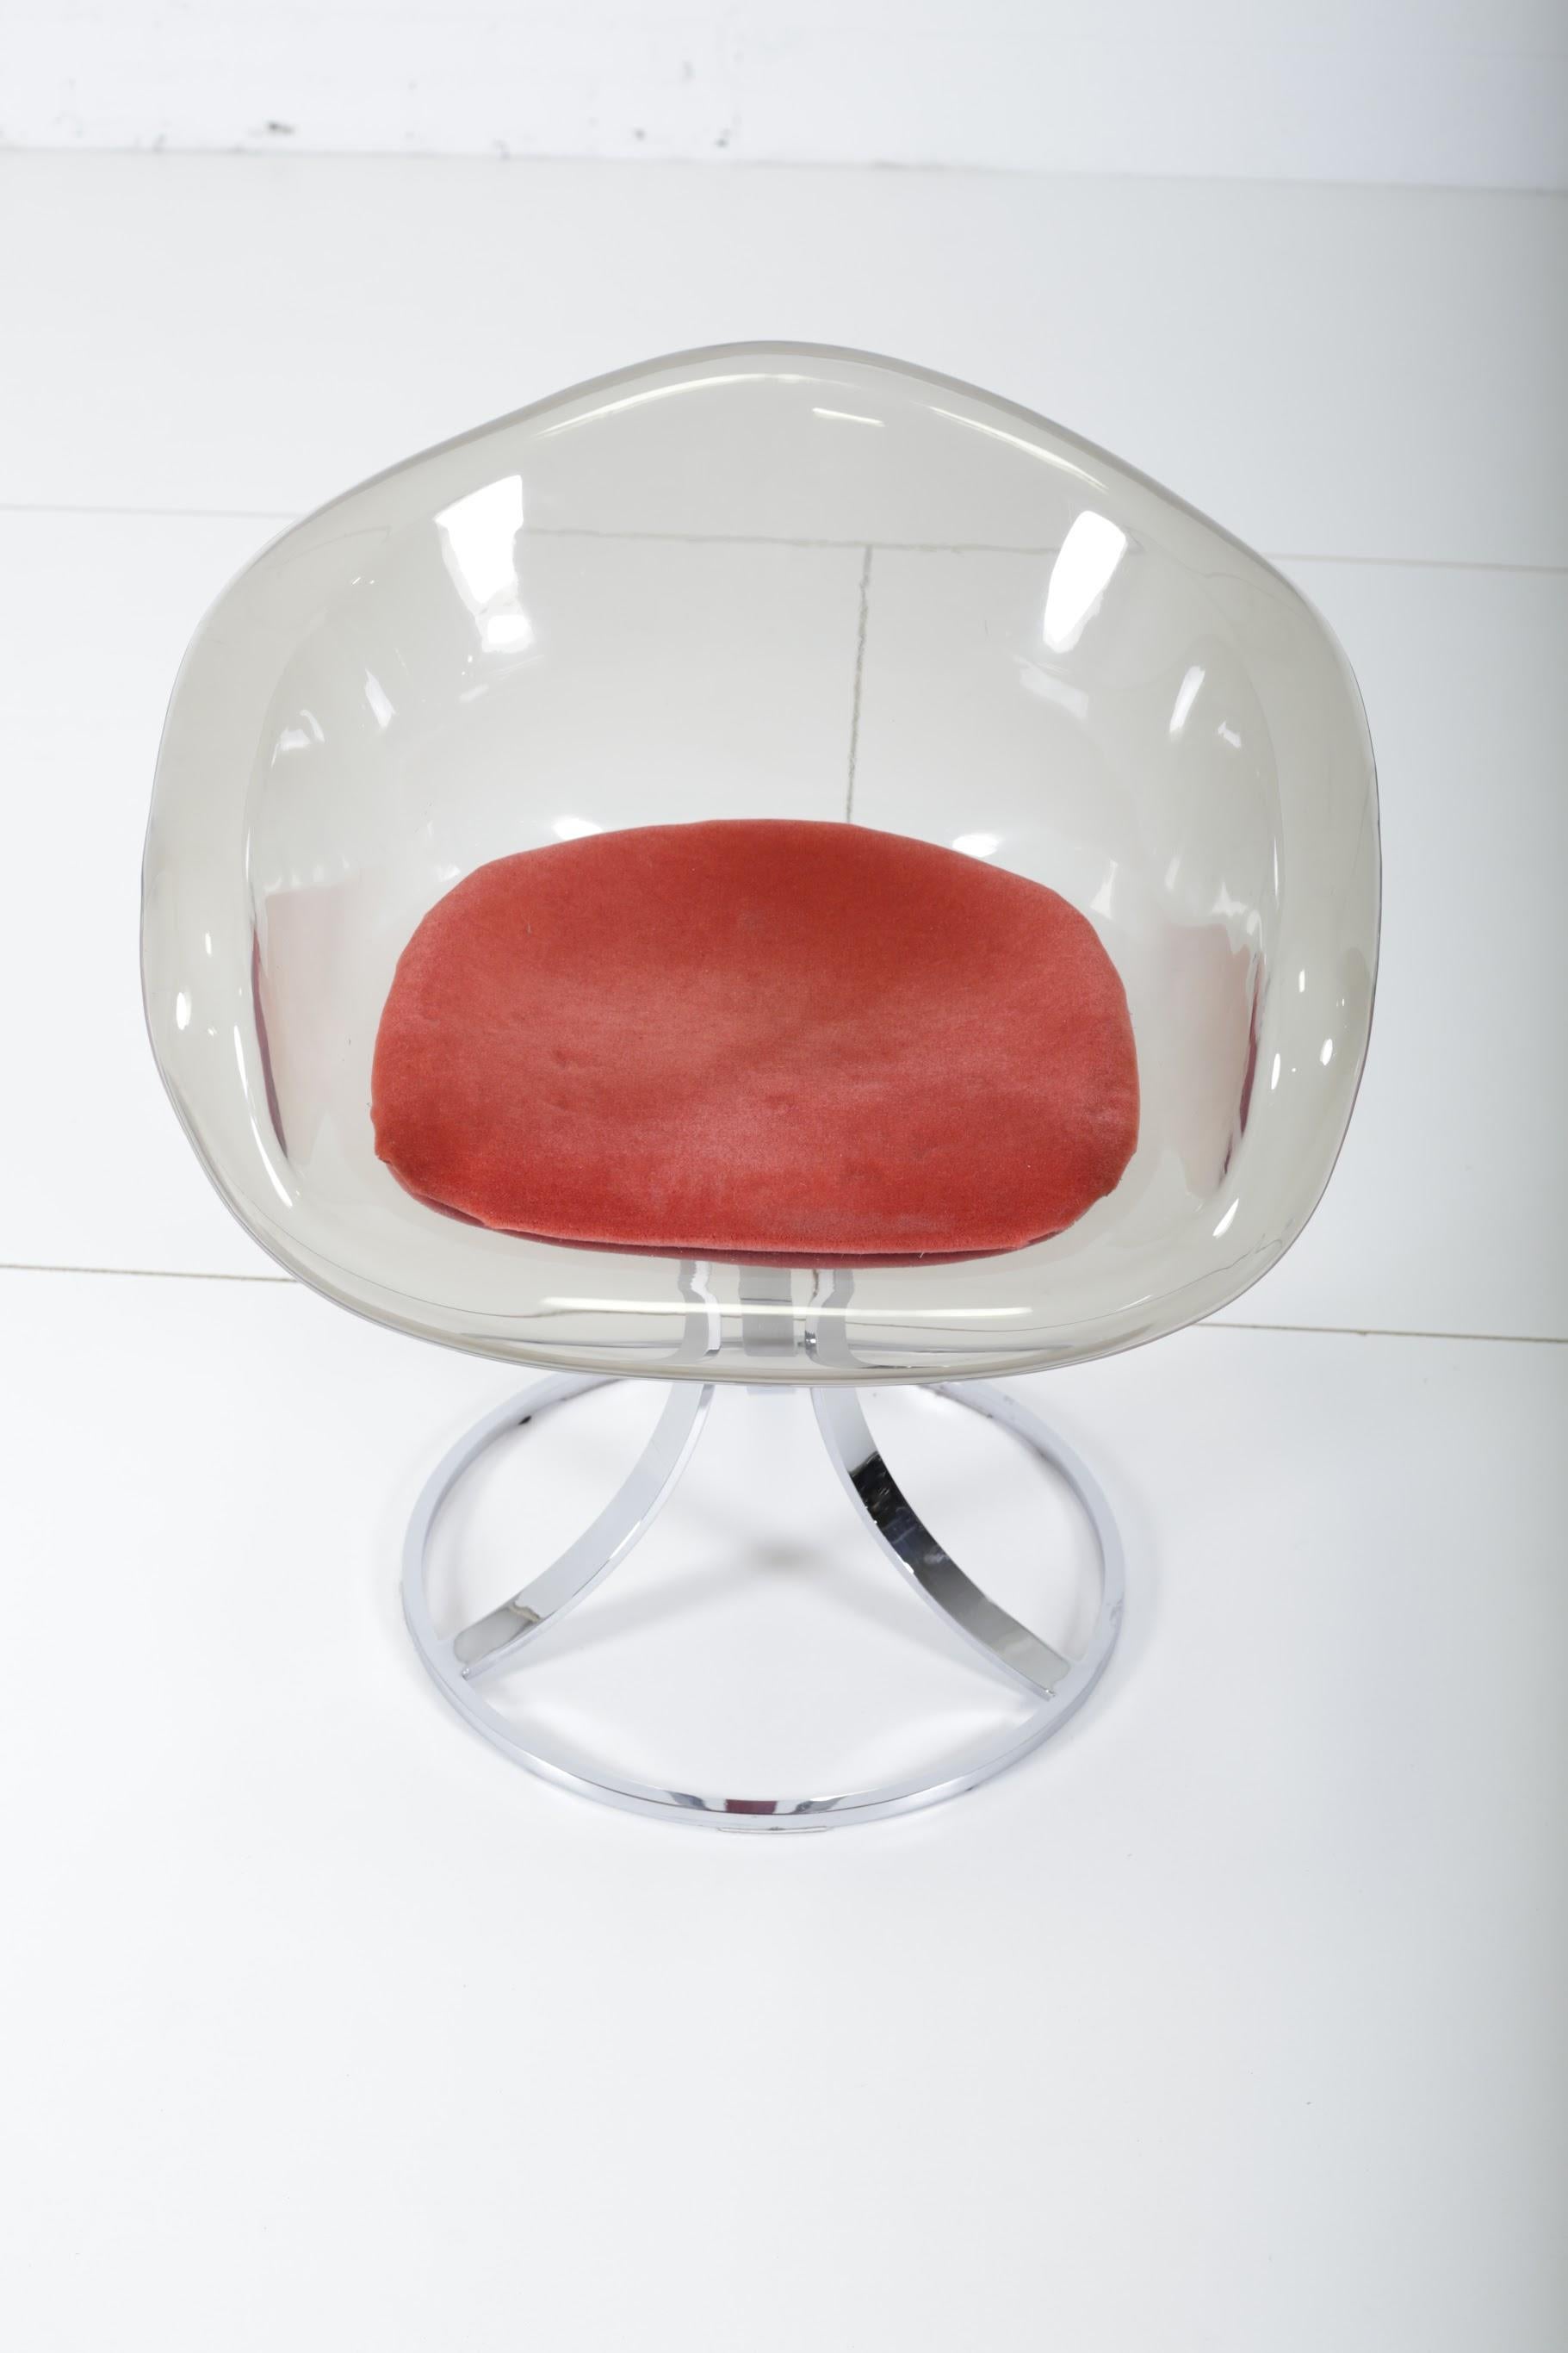 Lucite tulip chair by British designer, Peter Hoyte, circa 1968. Newer mohair upholstery in coral red color. Polished chrome base.